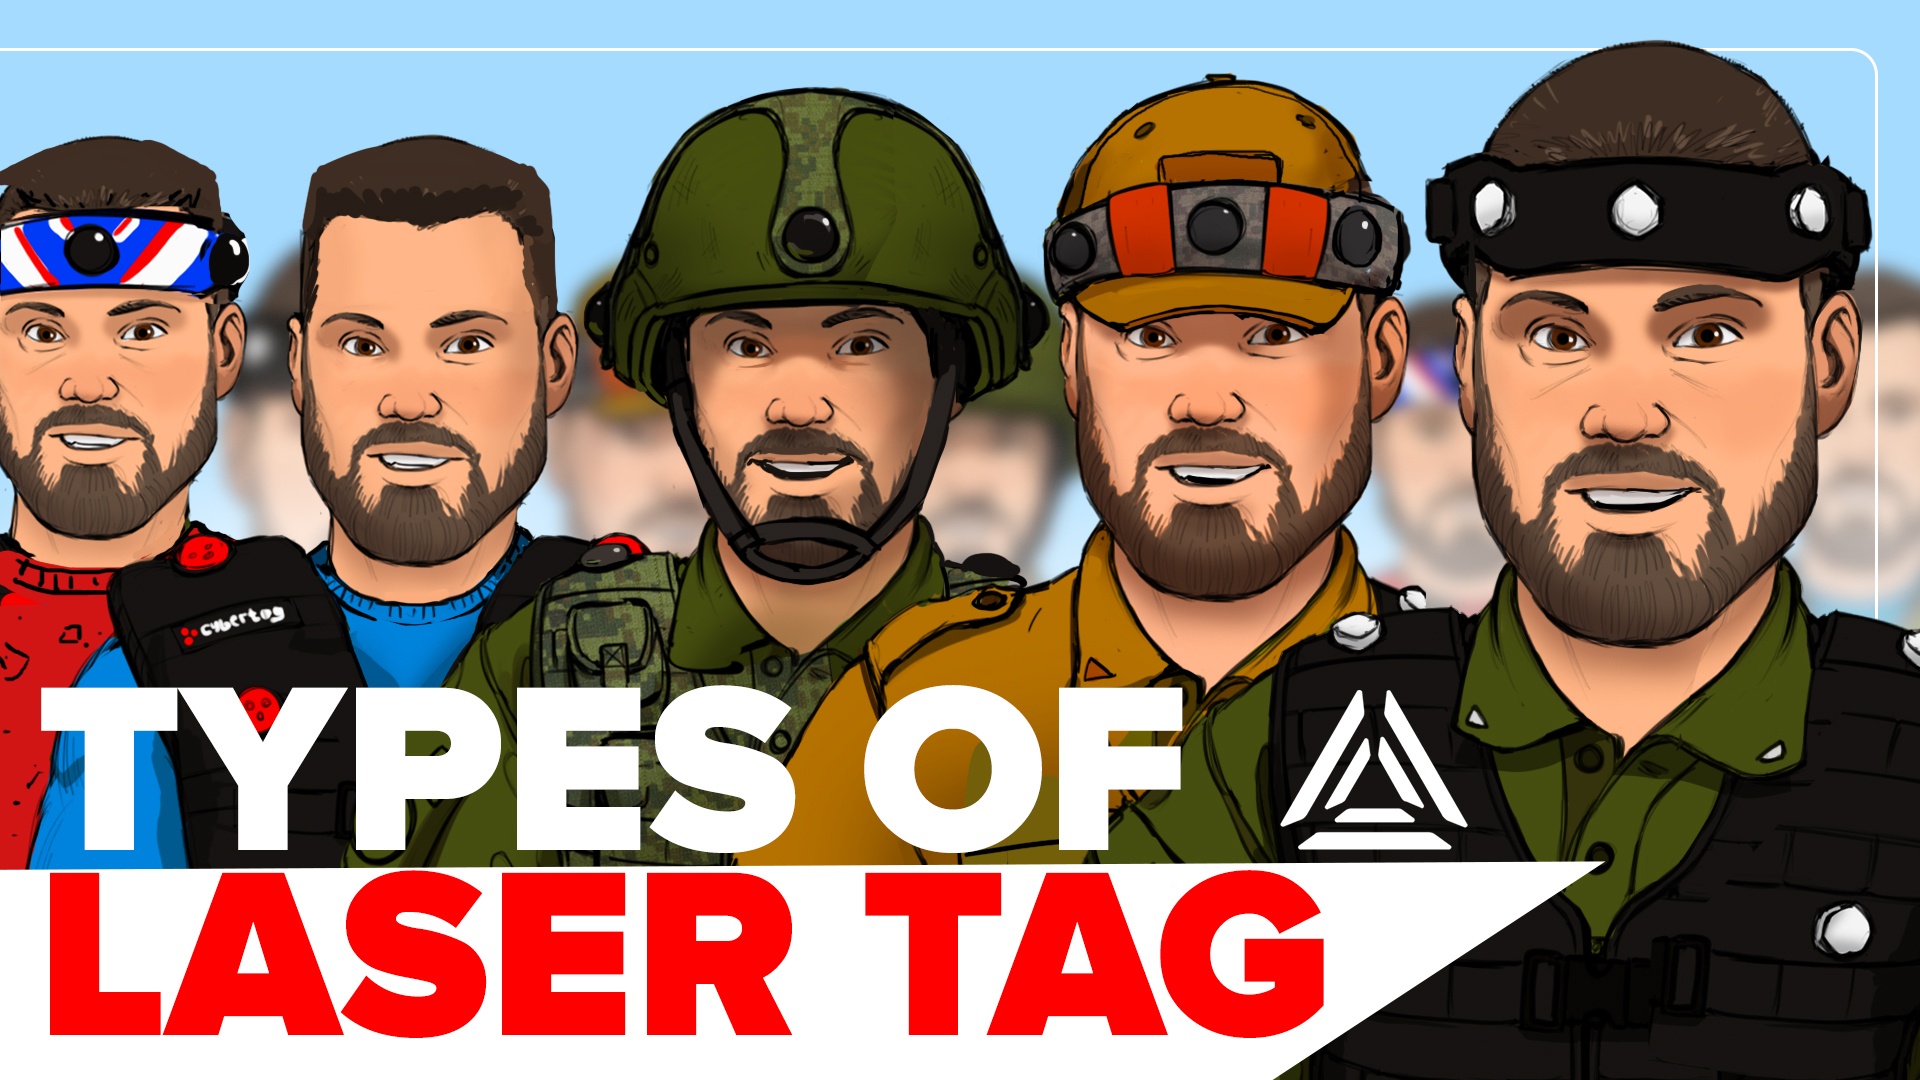 6 Types of Laser Tag. Ready to Name them All?